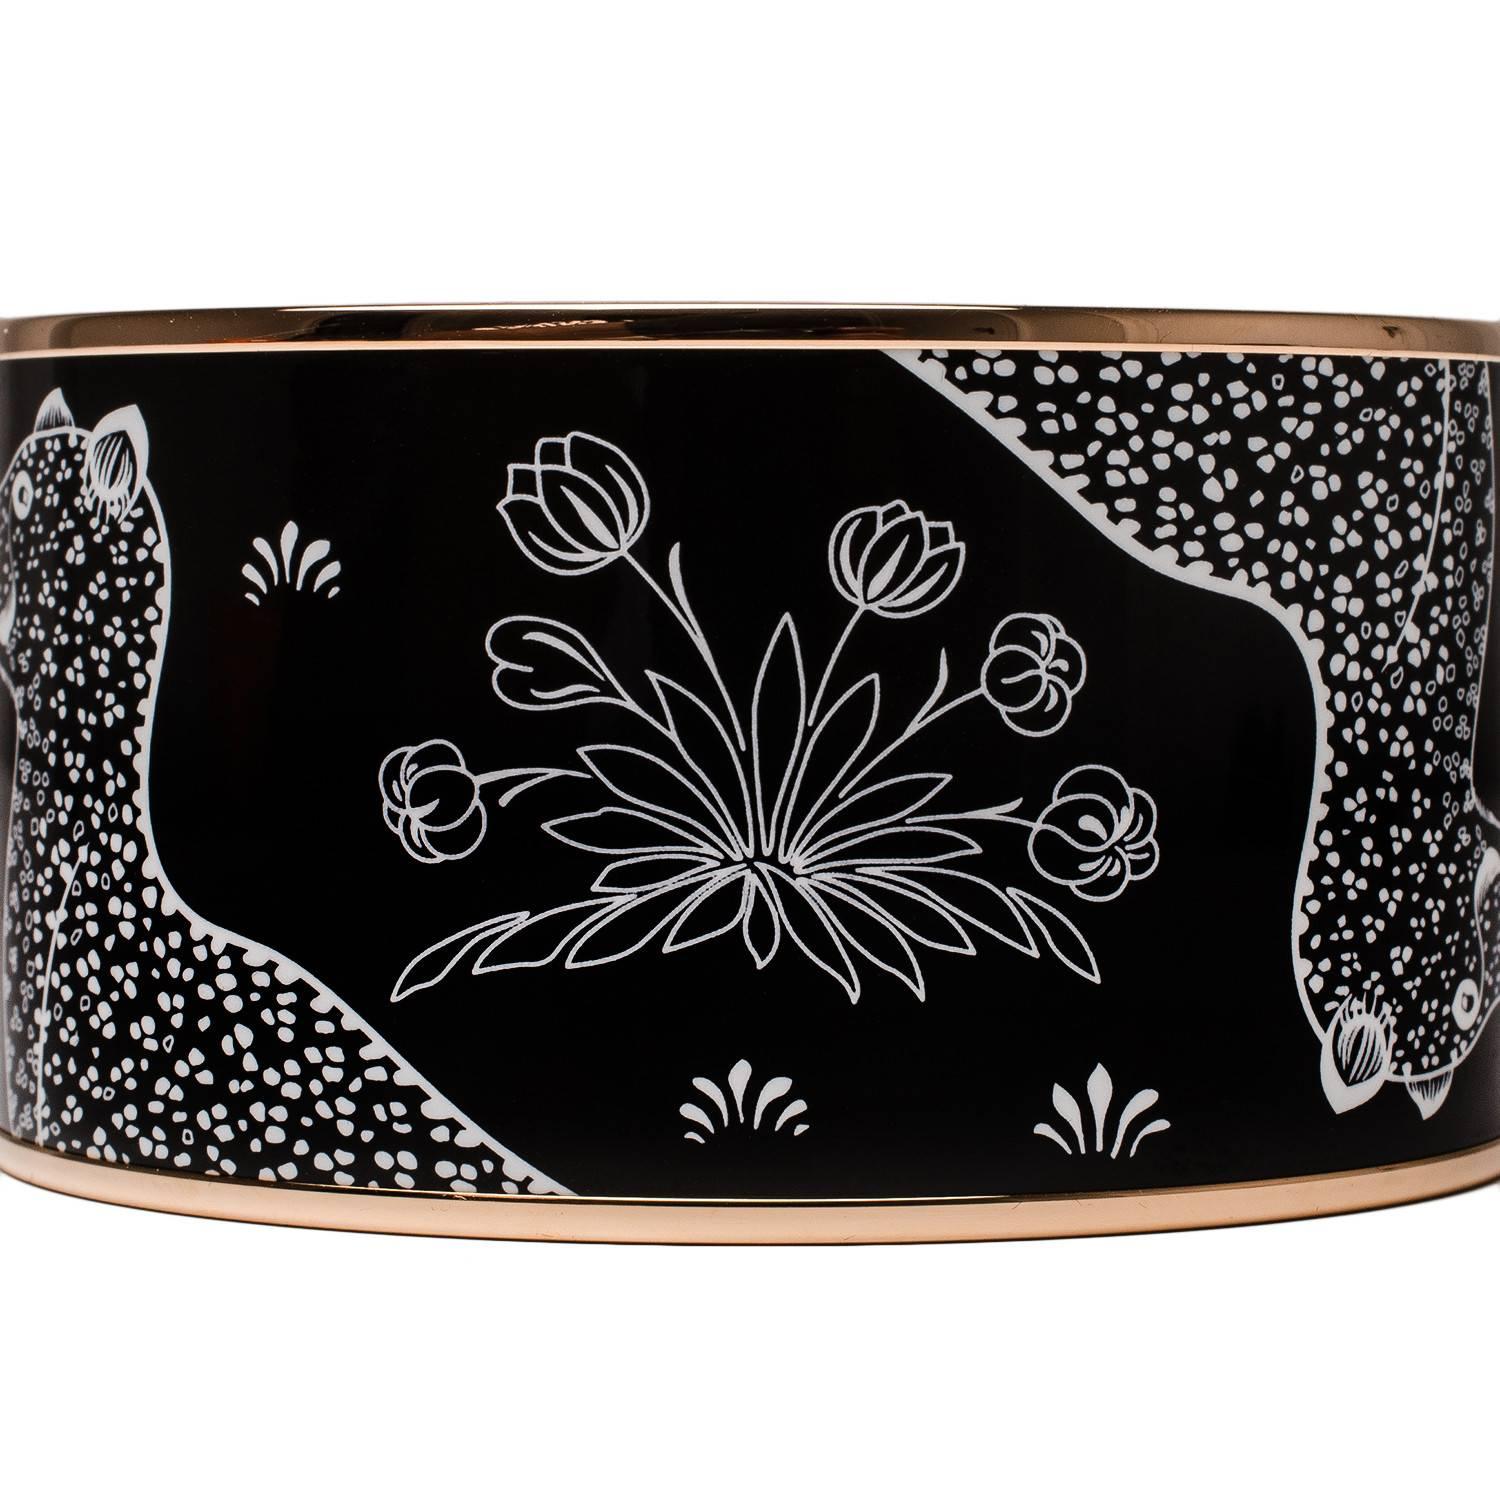 Hermes "Les Leopards" wide printed enamel bracelet size GM (70).
  
This bracelet depicts leopards and flowers in a black background with rose gold plated hardware.

Origin: France
 
Condition: Never worn
 
Accompanied by: Hermes box,